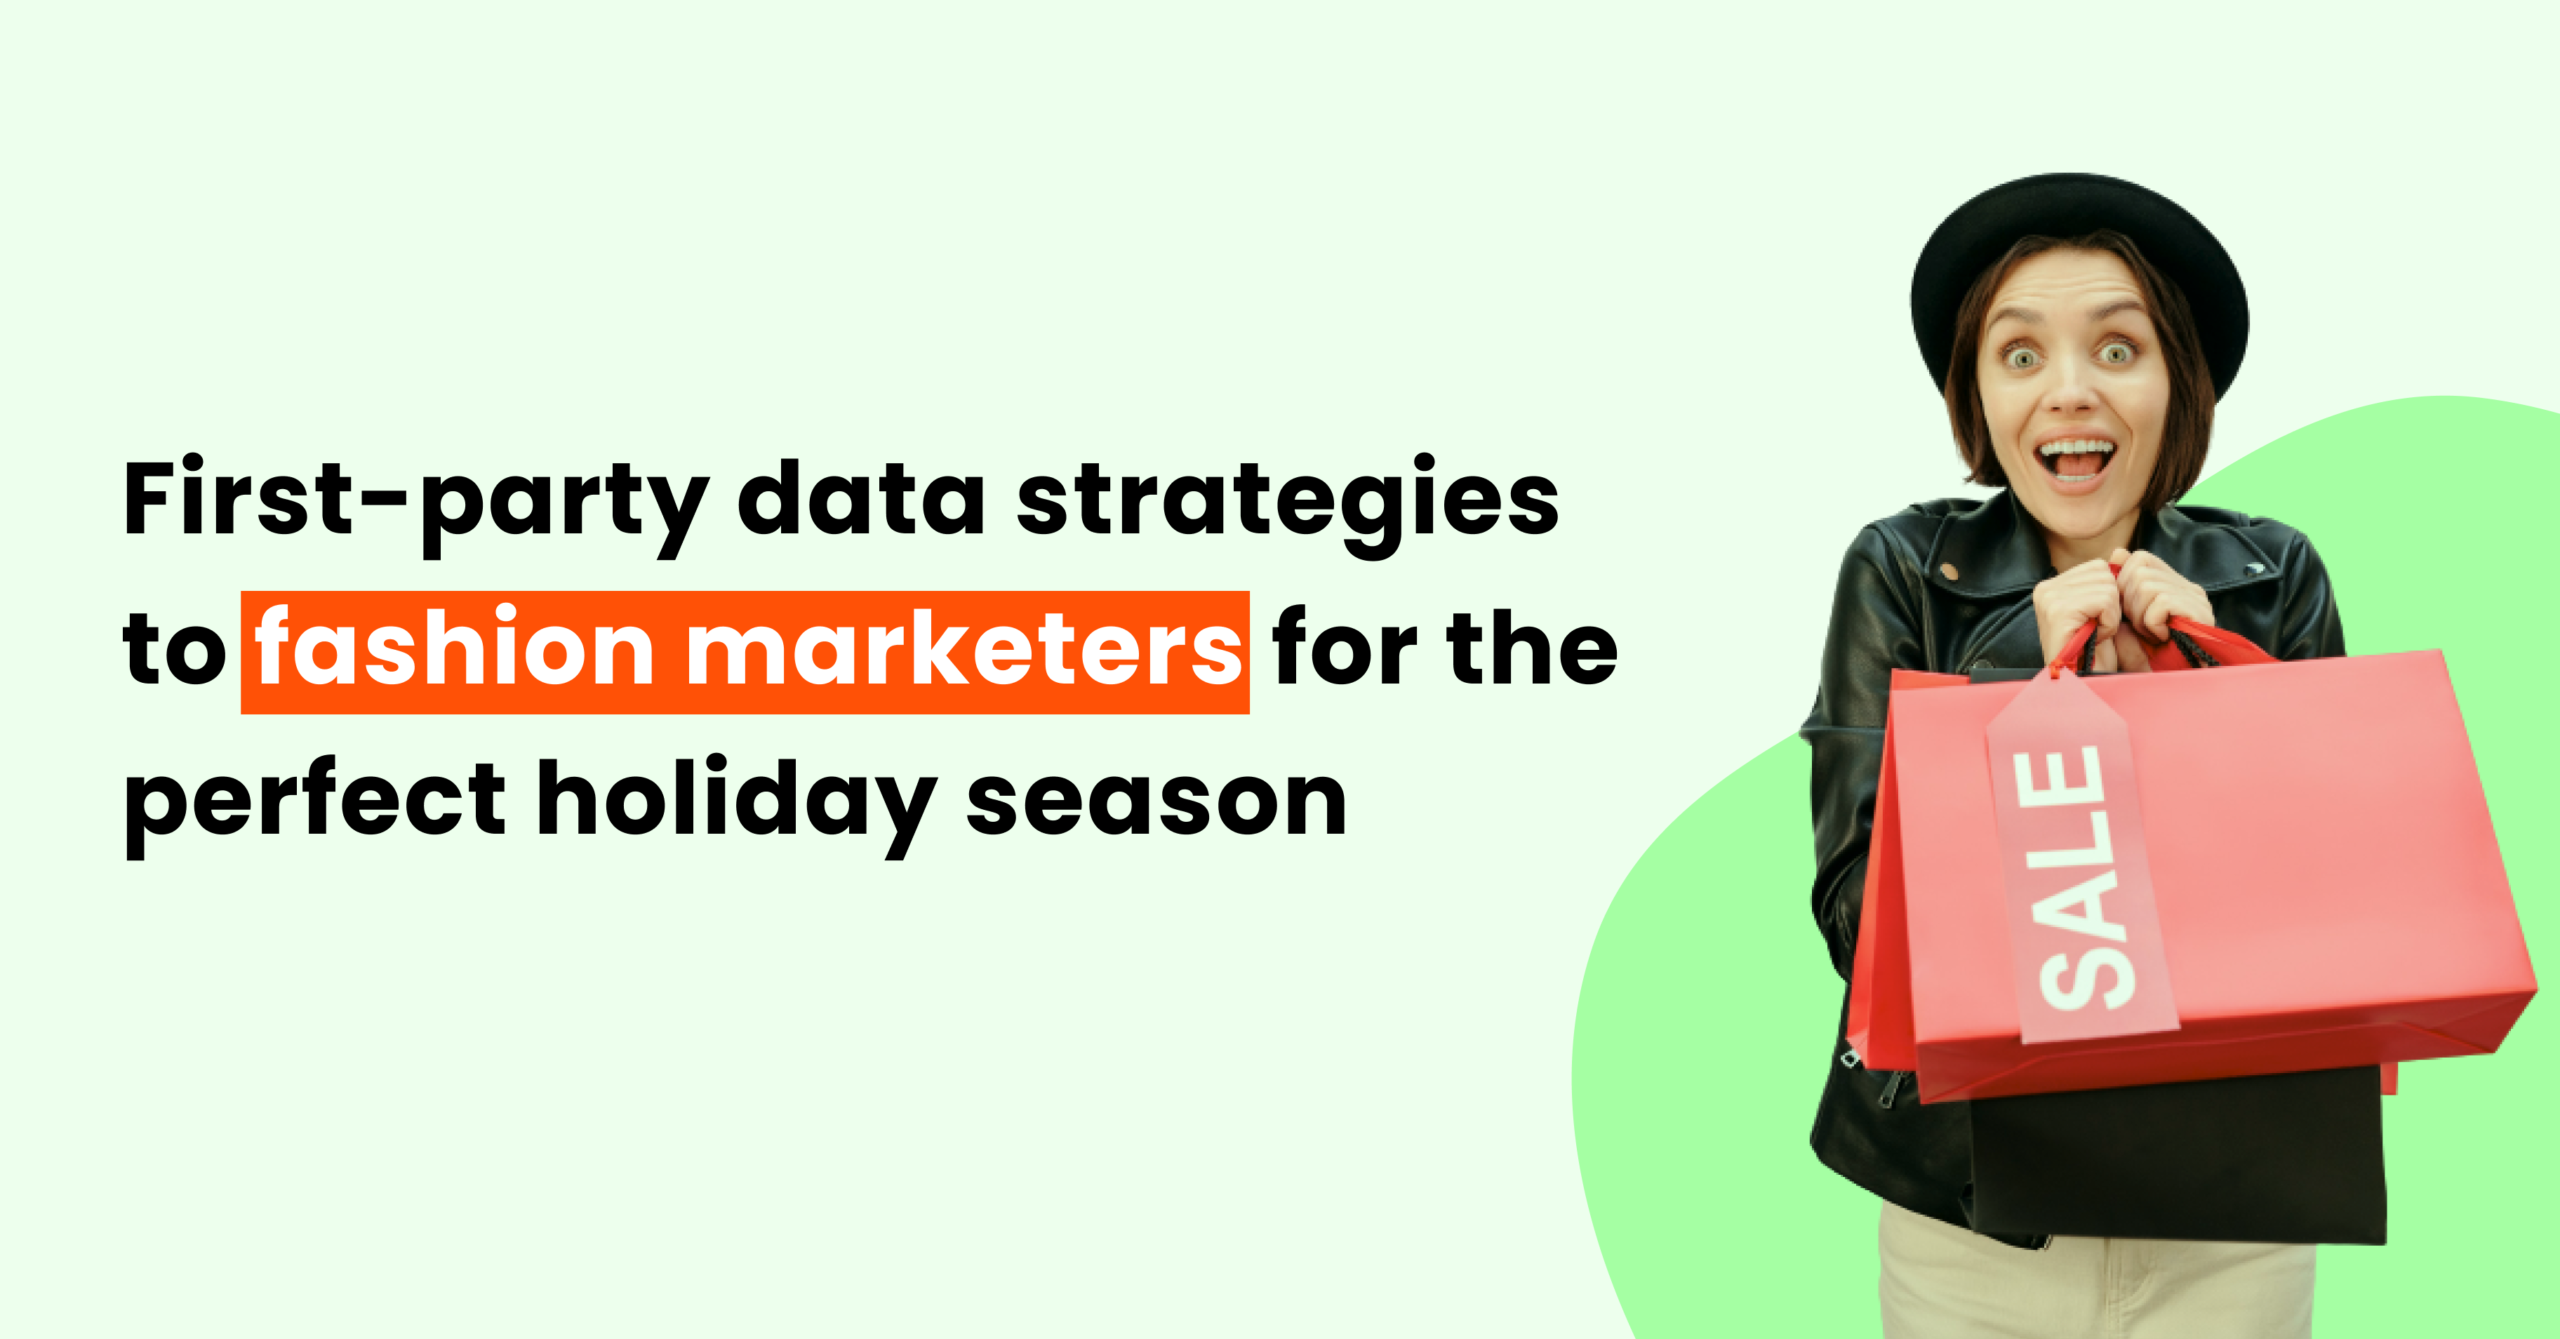 First-party data strategies to fashion marketers for the perfect holiday season.png